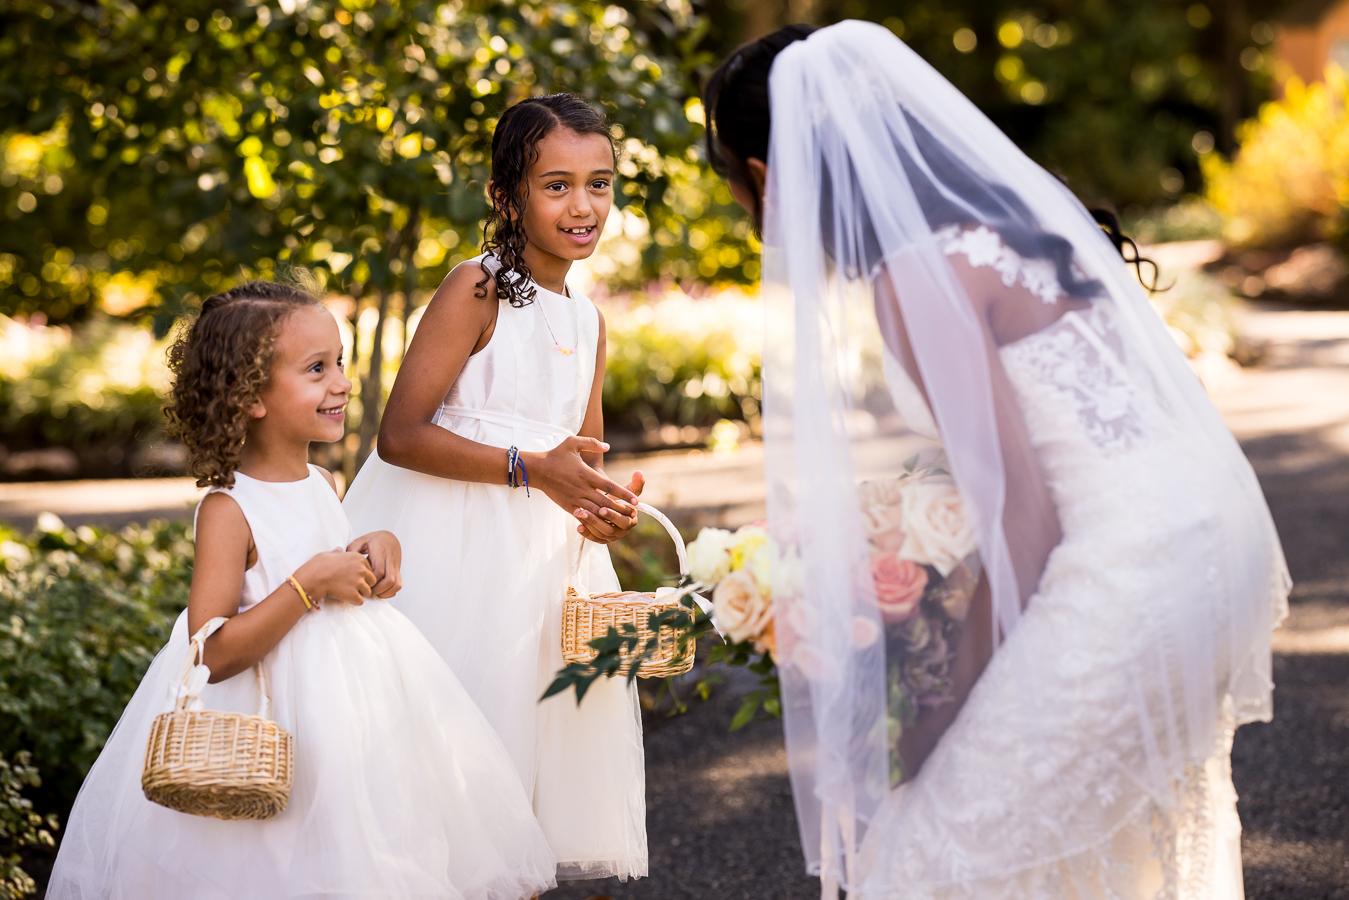 candid moment between the bride and her flower girls before the wedding ceremony at st francis hall captured by dc wedding photographer, Lisa Rhinehart 